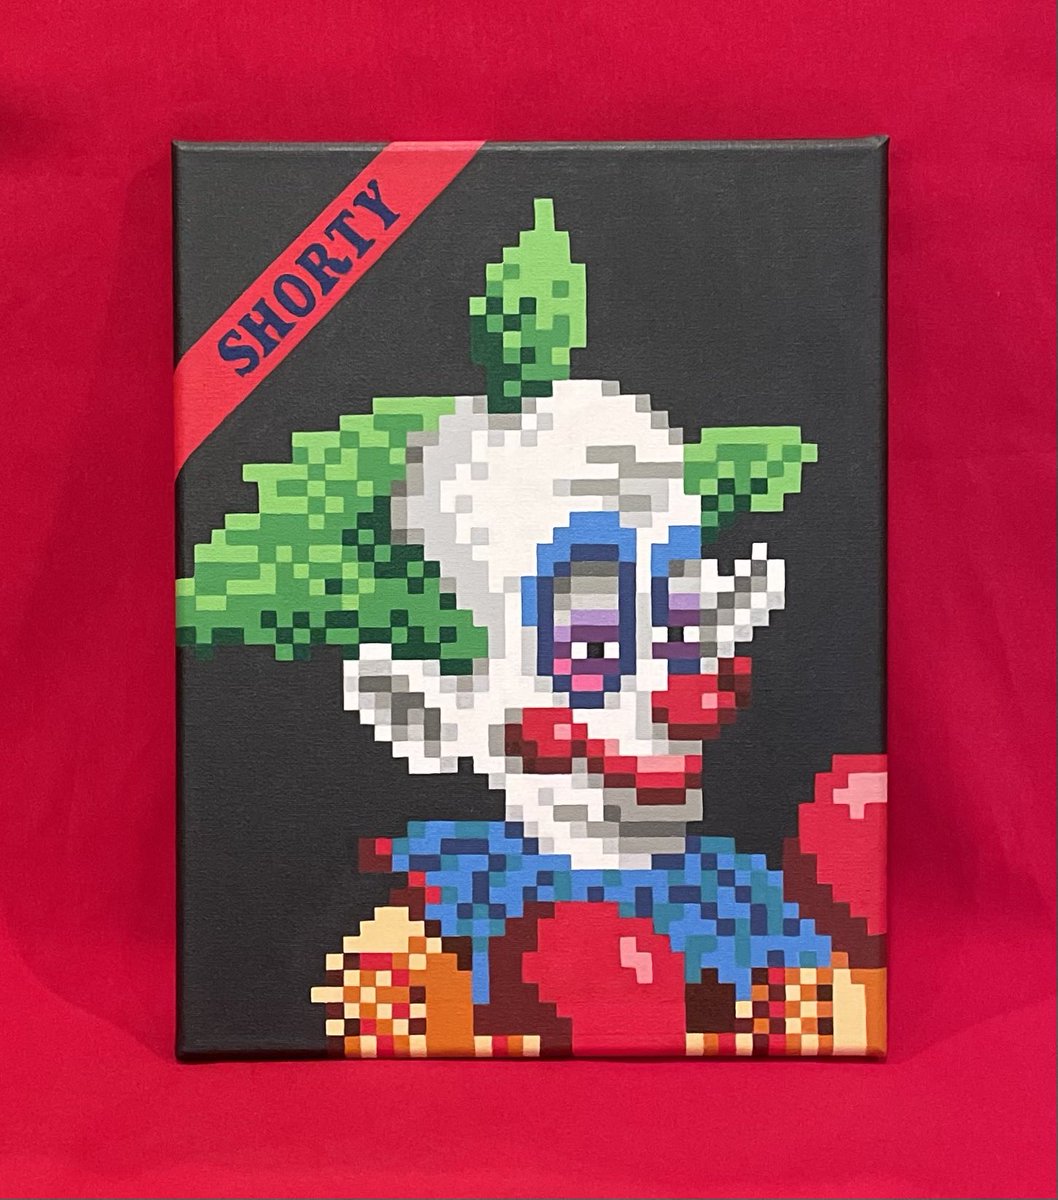 Shorty painted by my mother a.k.a. Emerald Lily another instant favorite! More pictures coming soon since she got him signed by the Chiodo brothers creators of the one and only Killer Klowns! 🤡🍿🎥 #killerklowns #killerklownsfromouterspace #80smovie #80sclassic #art #artist